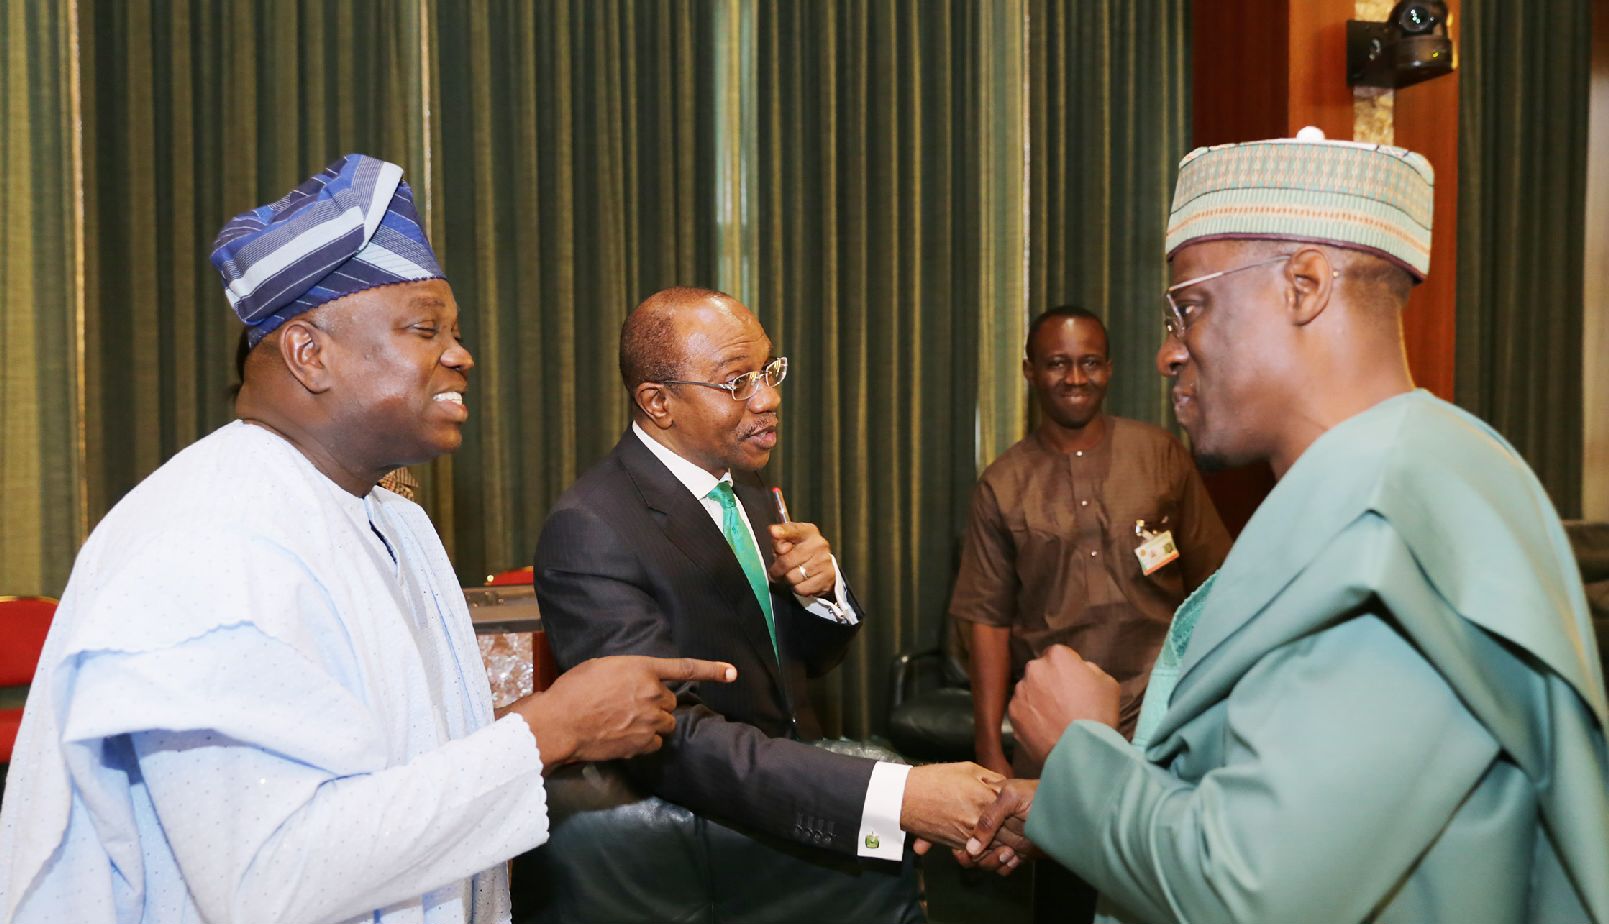 L-R: Lagos State Governor, Mr. Akinwunmi Ambode, Governor, Central Bank of Nigeria, Mr. Godwin Emefiele  and Governor of Kwara State, Alhaji Abdulfatah Ahmed during the NEC meeting at the State House, Abuja on Thursday, September 17, 2015.